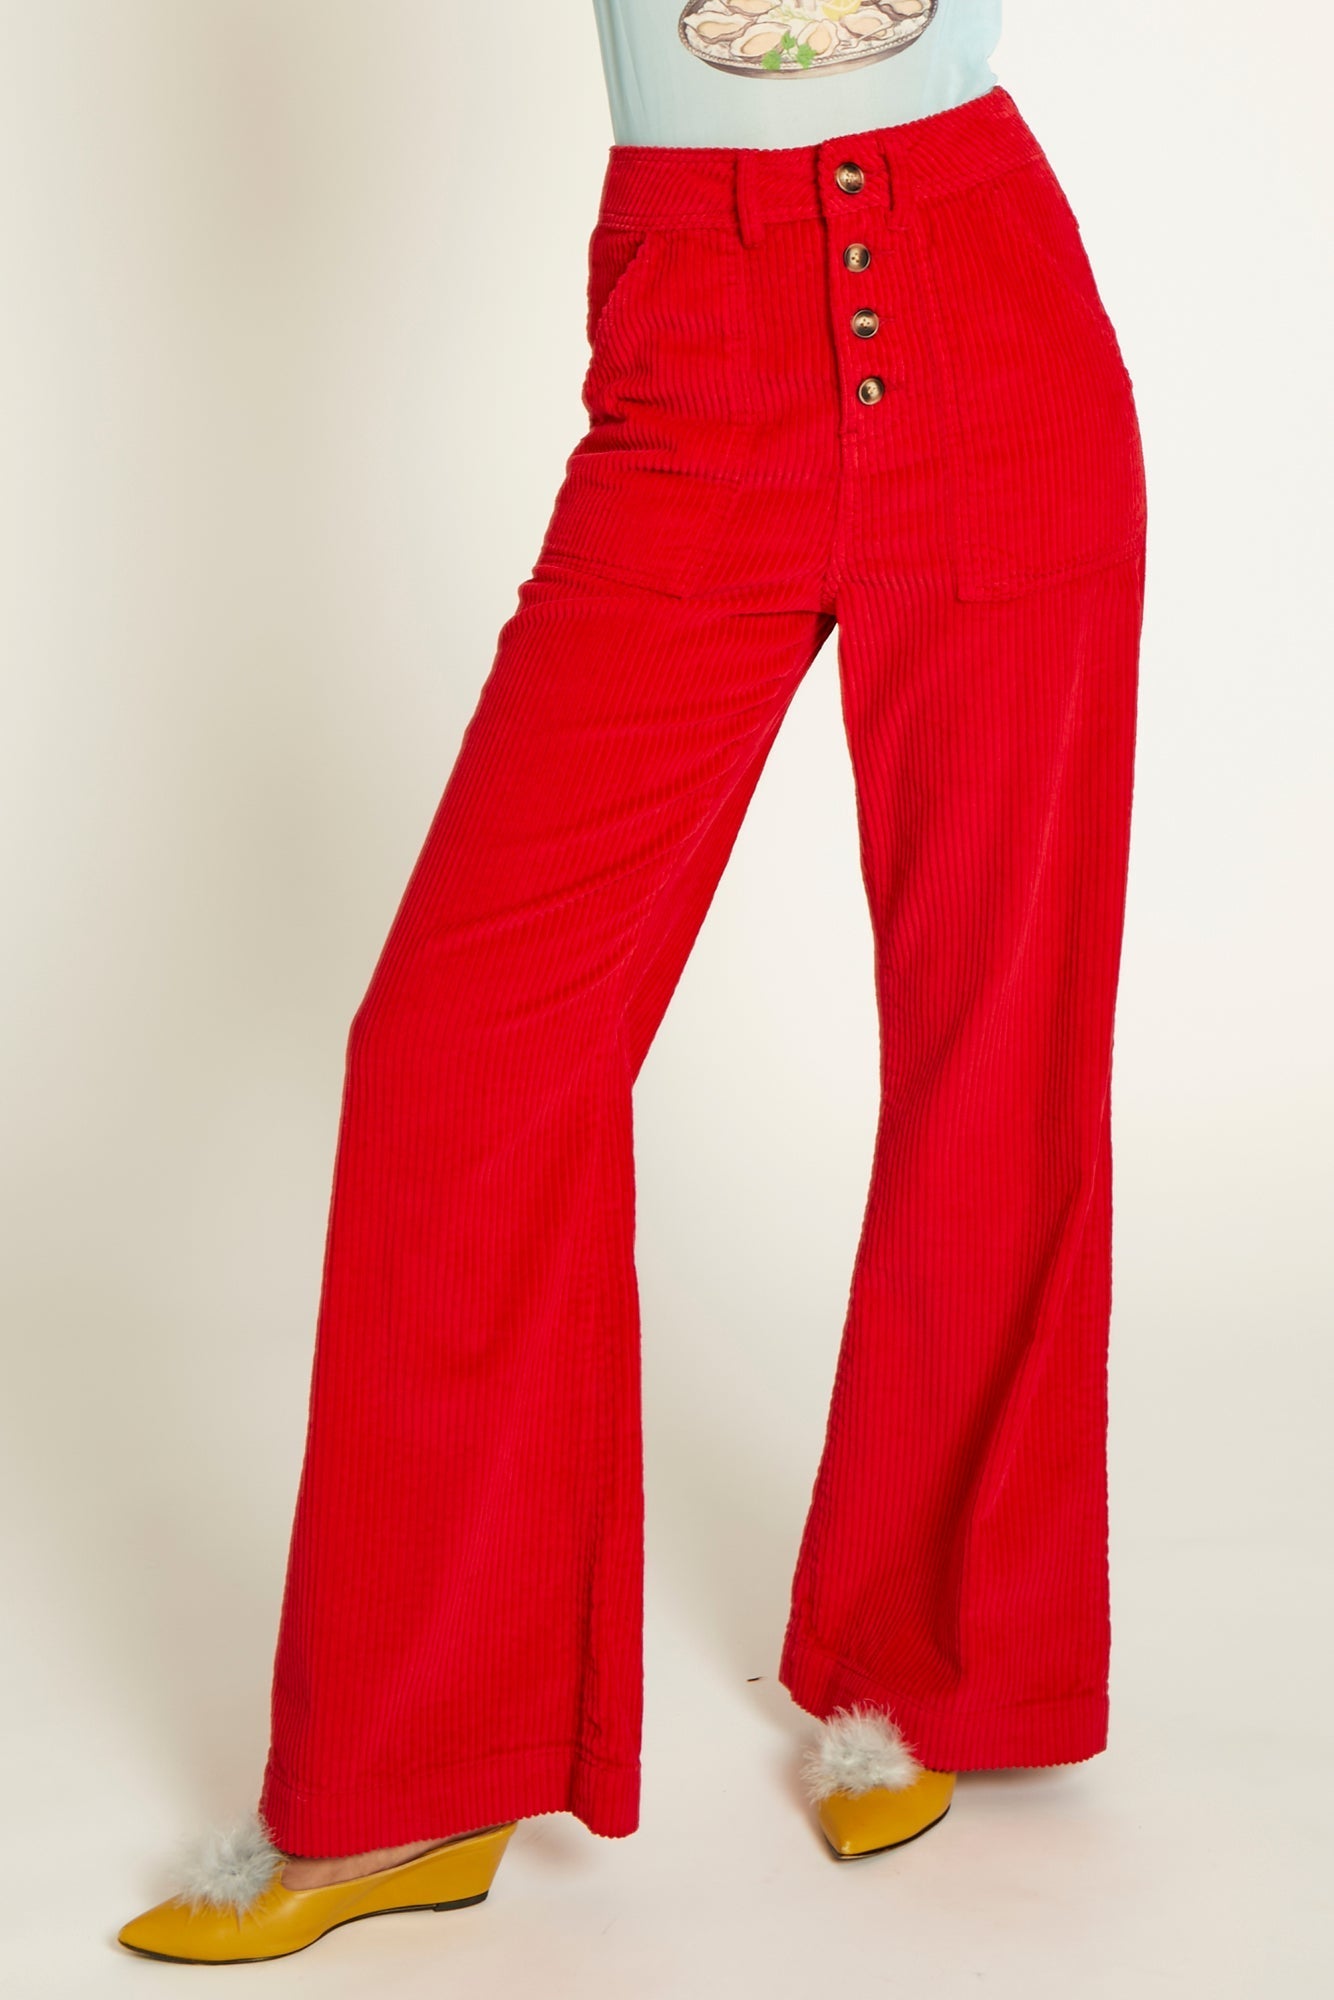 Red Women's High Waist Trousers, Wide Leg Pants for Women, Red Palazzo  Pants for Women, Tall Women Palazzo Pants High Rise, Business Casual - Etsy